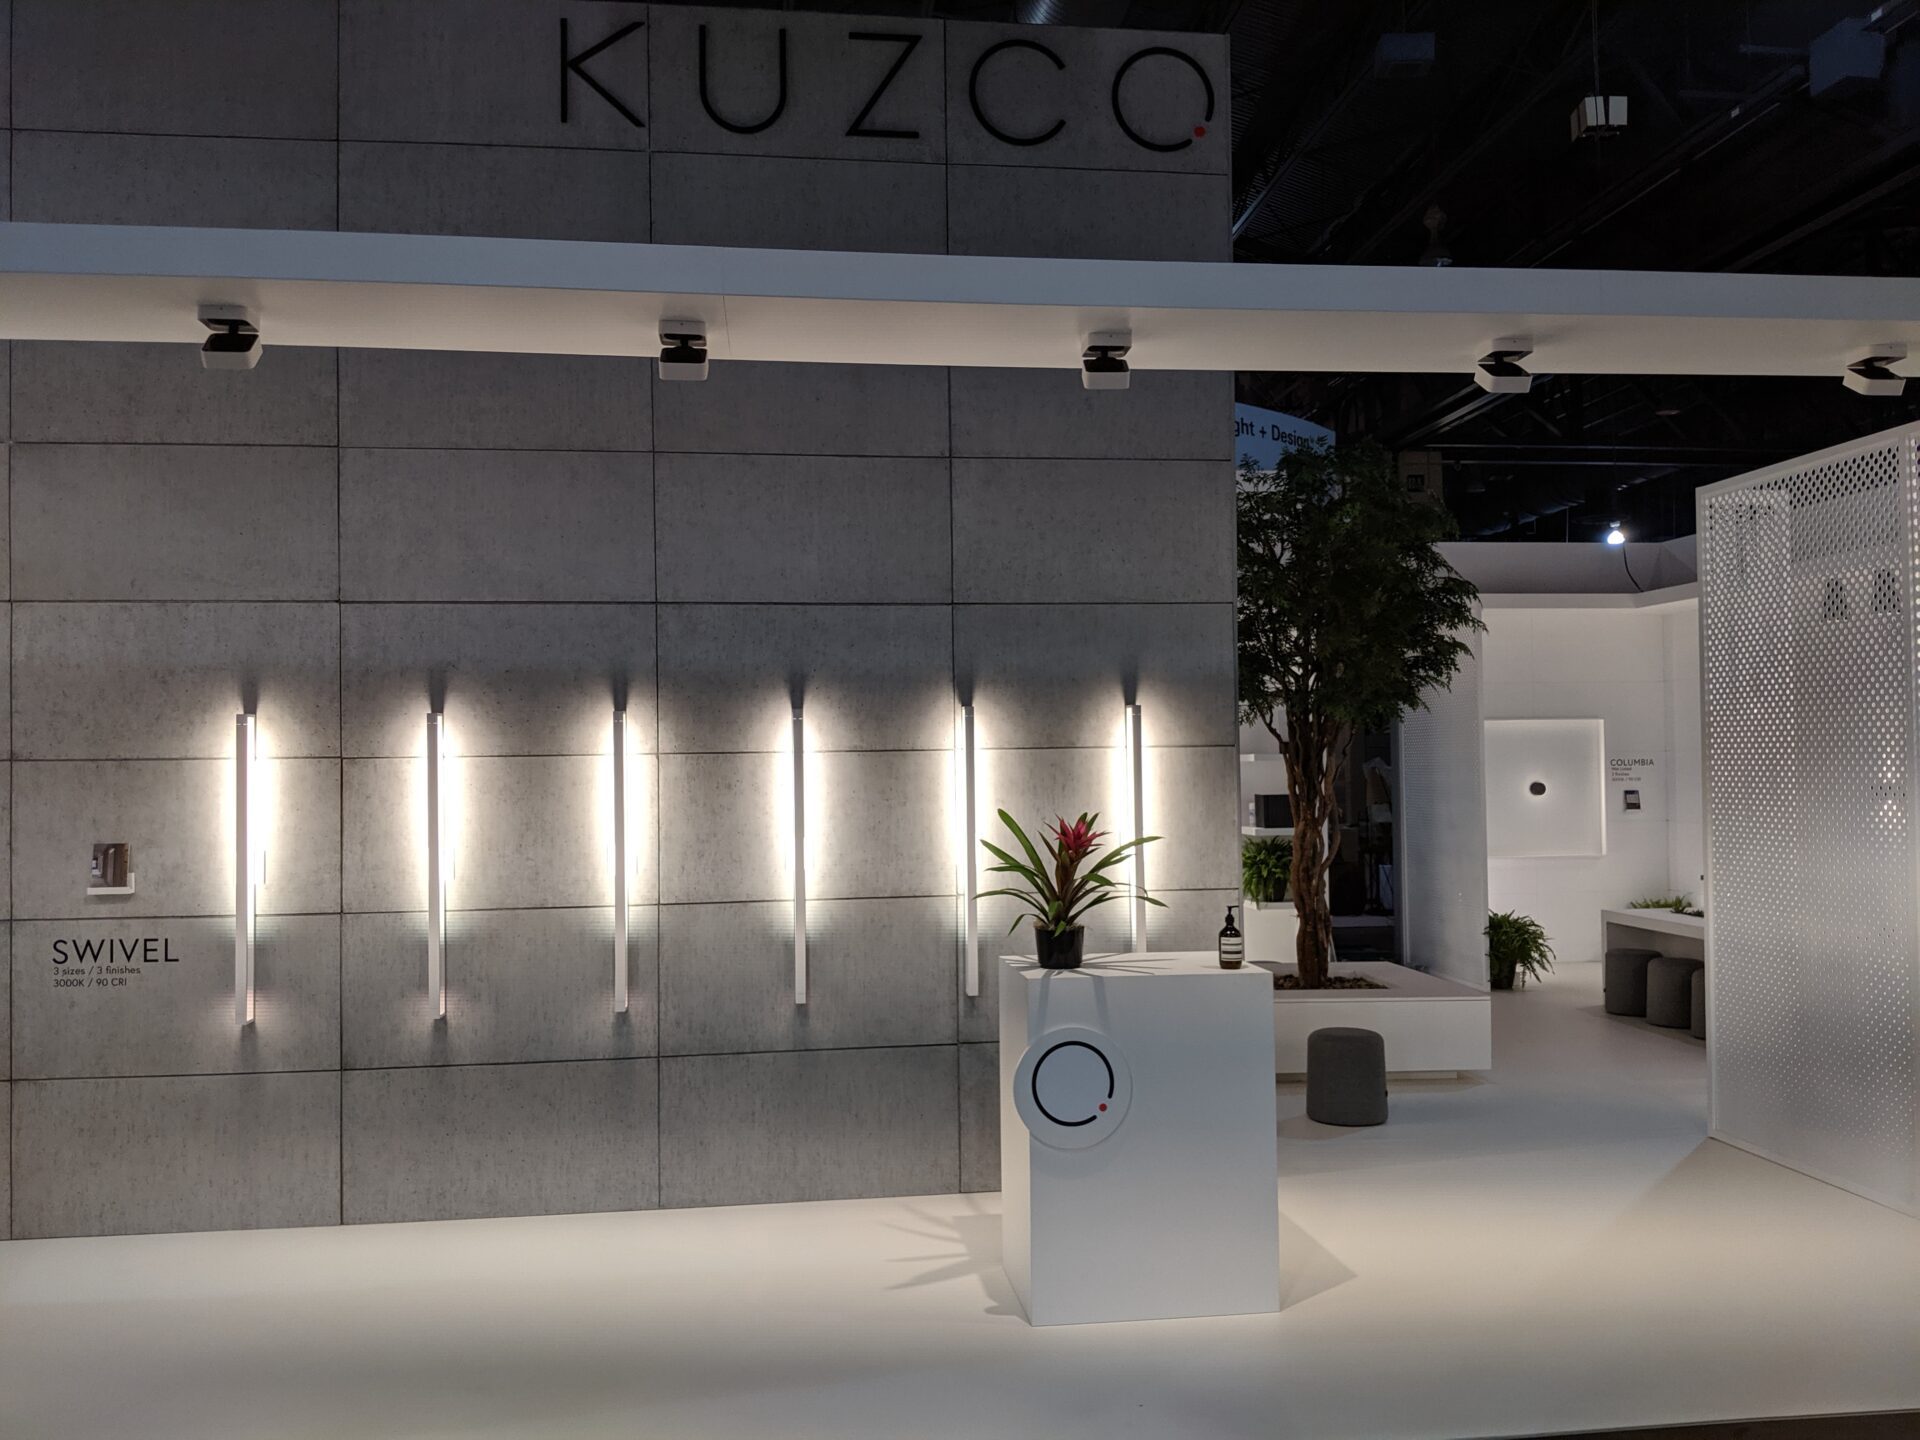 Kuzco trade show booth with greenery and upscale fabric seeting